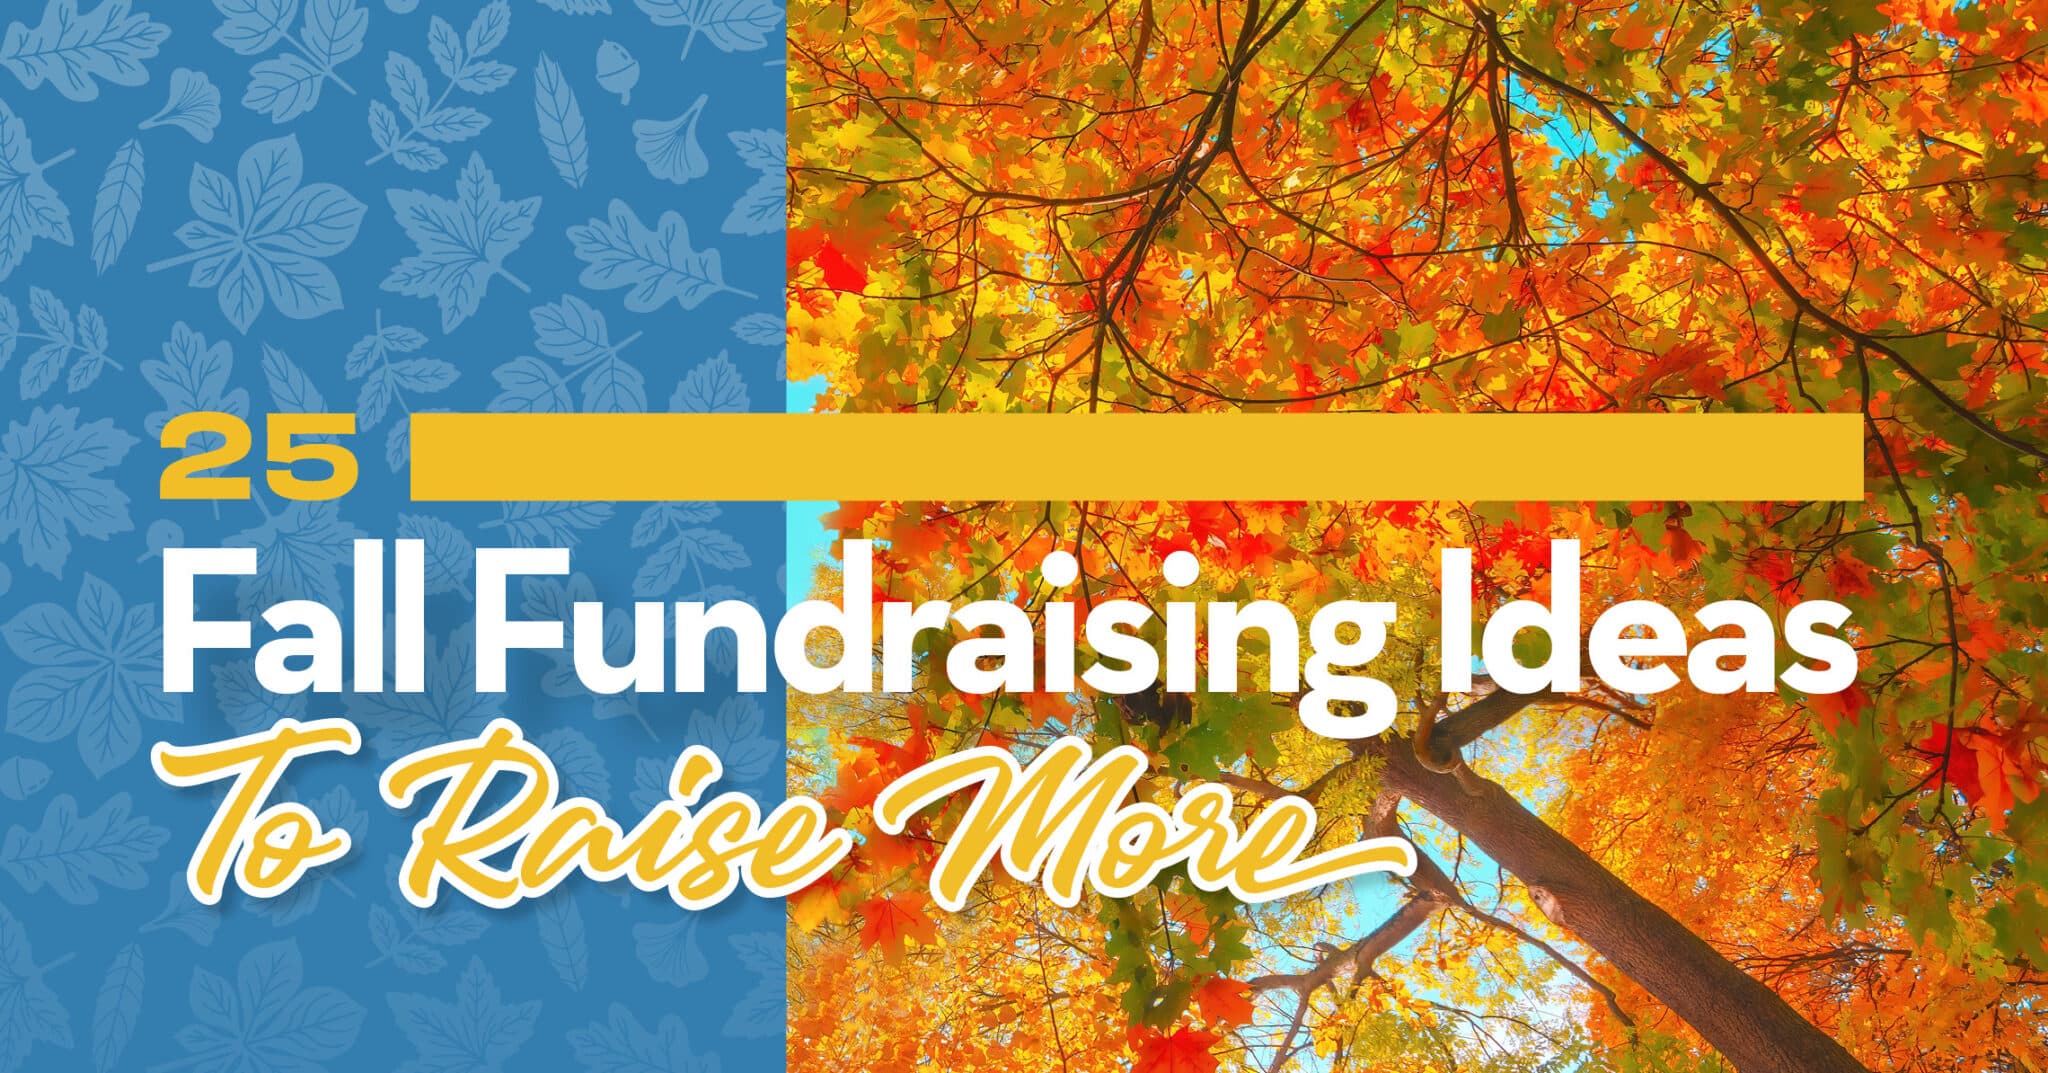 Fall Fundraising Ideas to Raise More